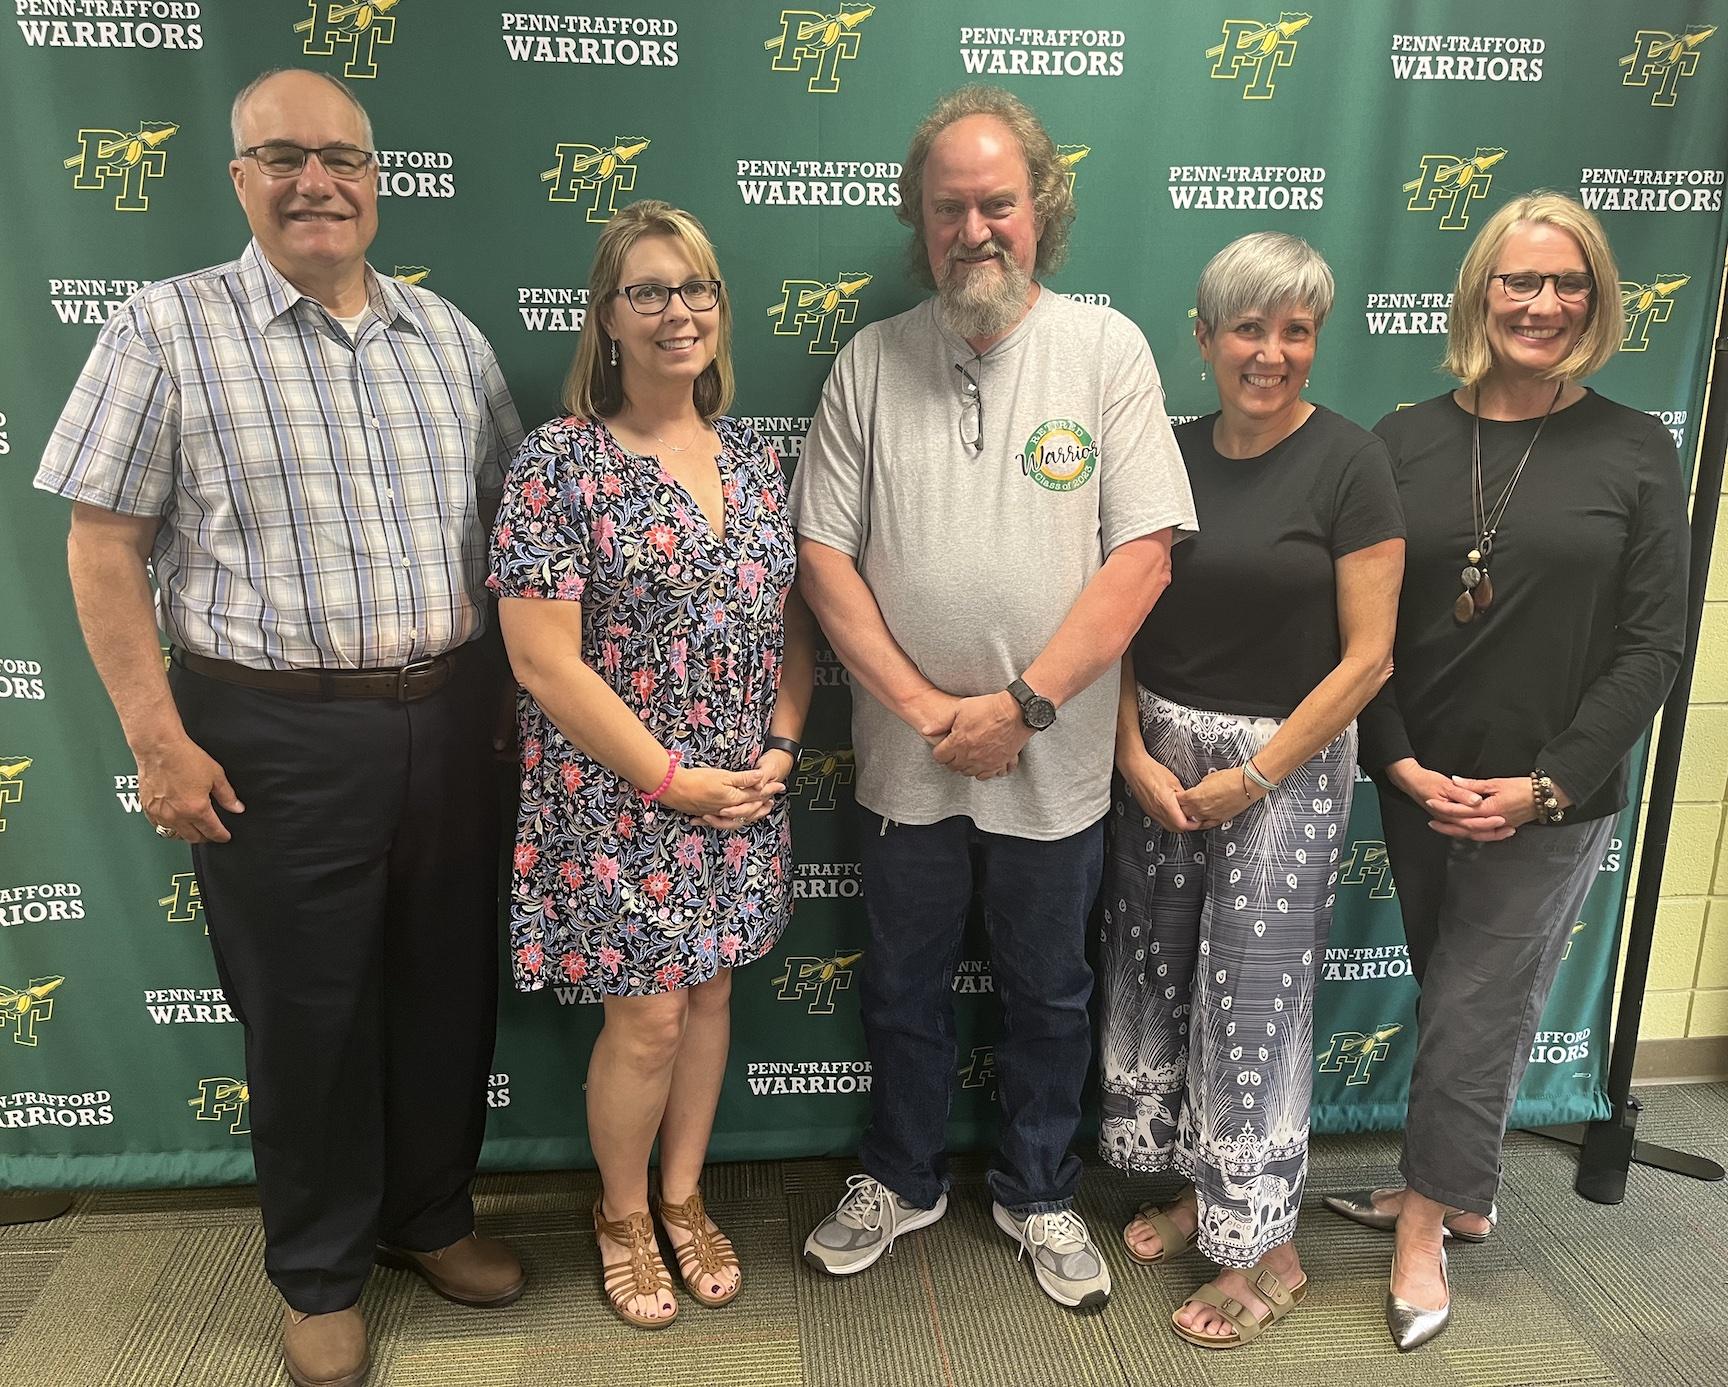 Some of the retirees were present at the June 5 board meeting; (left to right) Andy Rizzardi, Cristy Rizzardi, Ed Overly, Betsy Sandala, and Carla Gialloreto